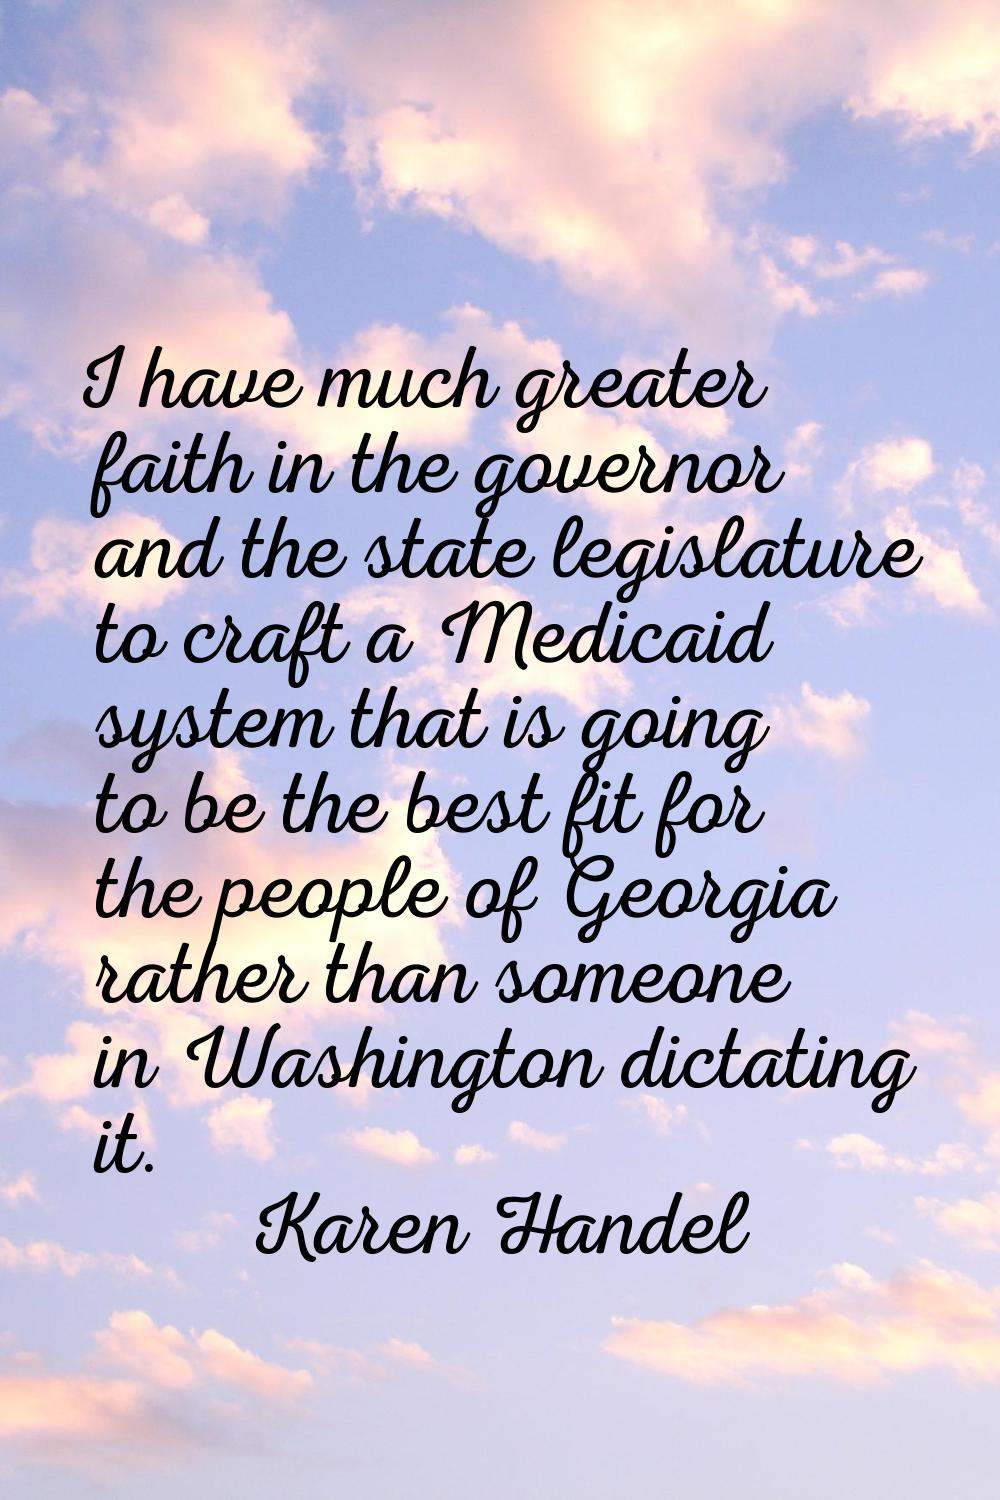 I have much greater faith in the governor and the state legislature to craft a Medicaid system that